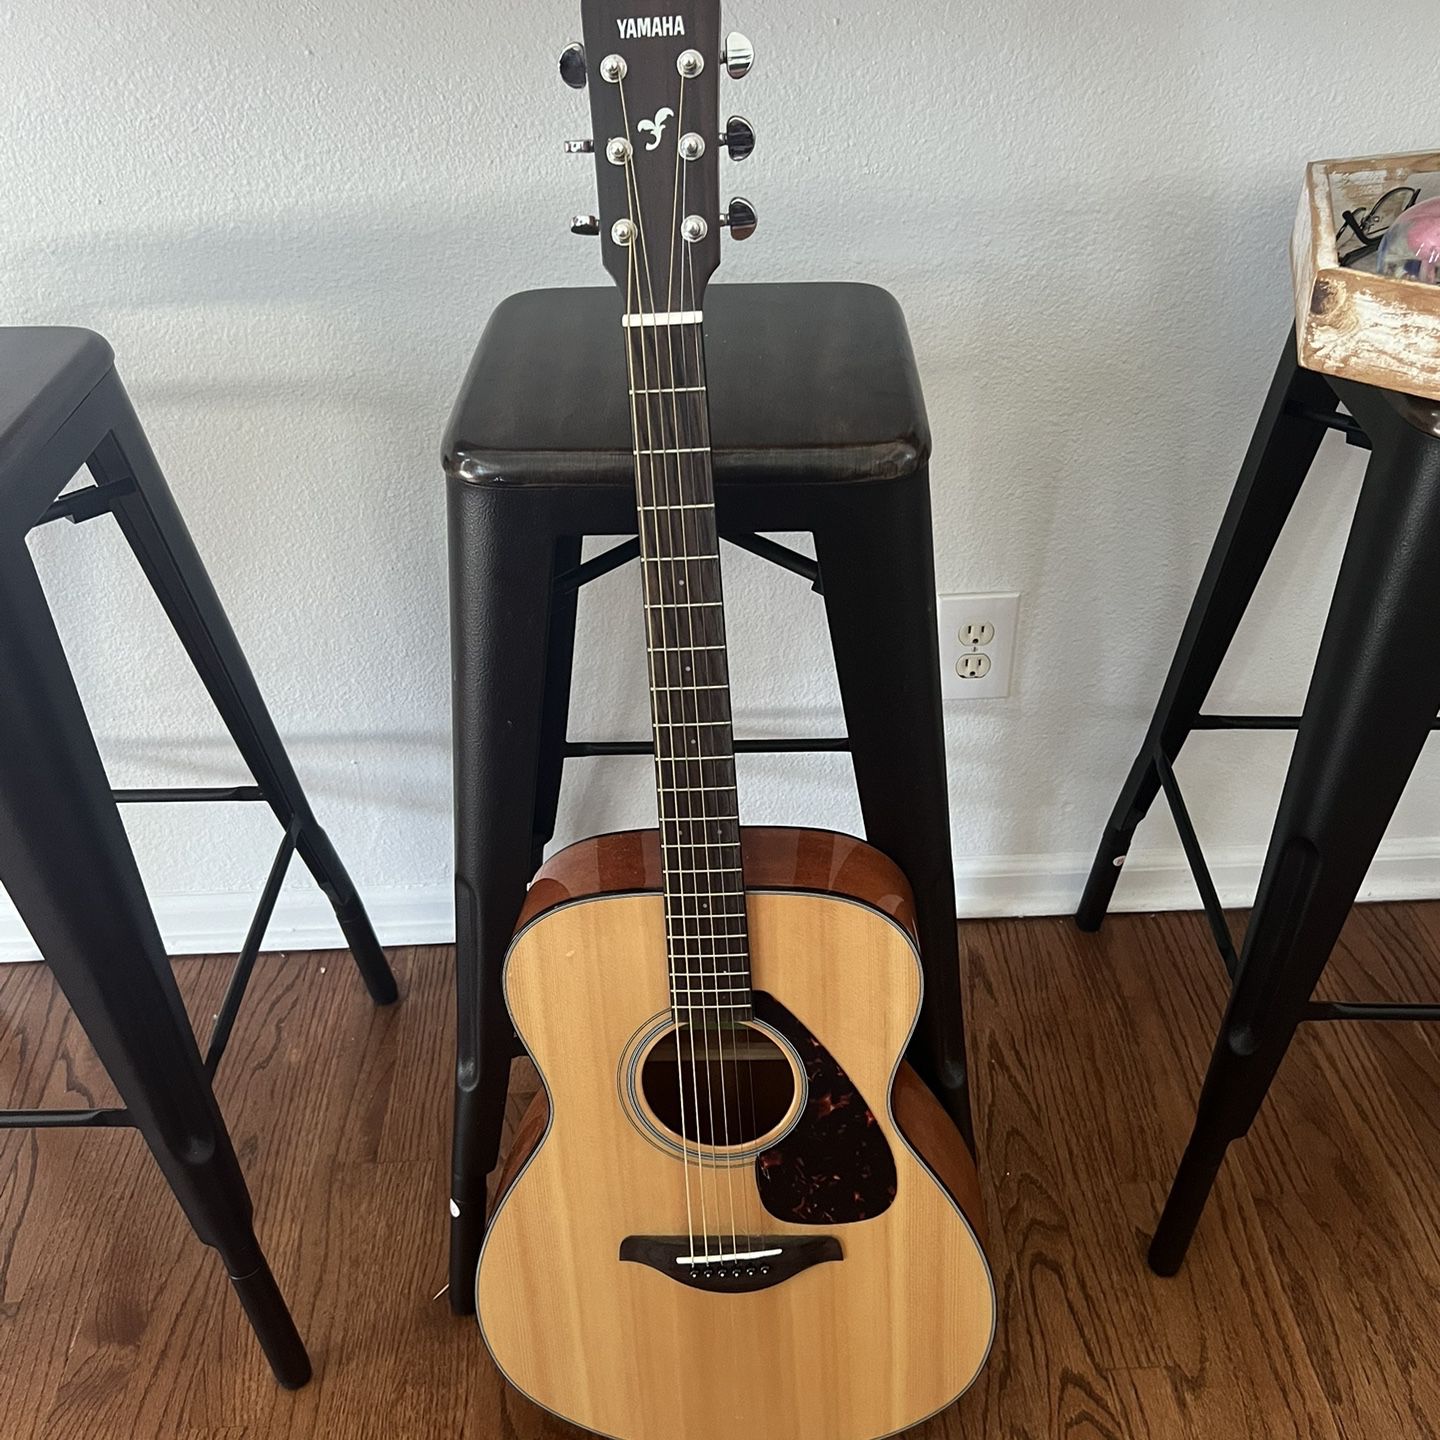 Yamaha Acoustic Guitar With Case 